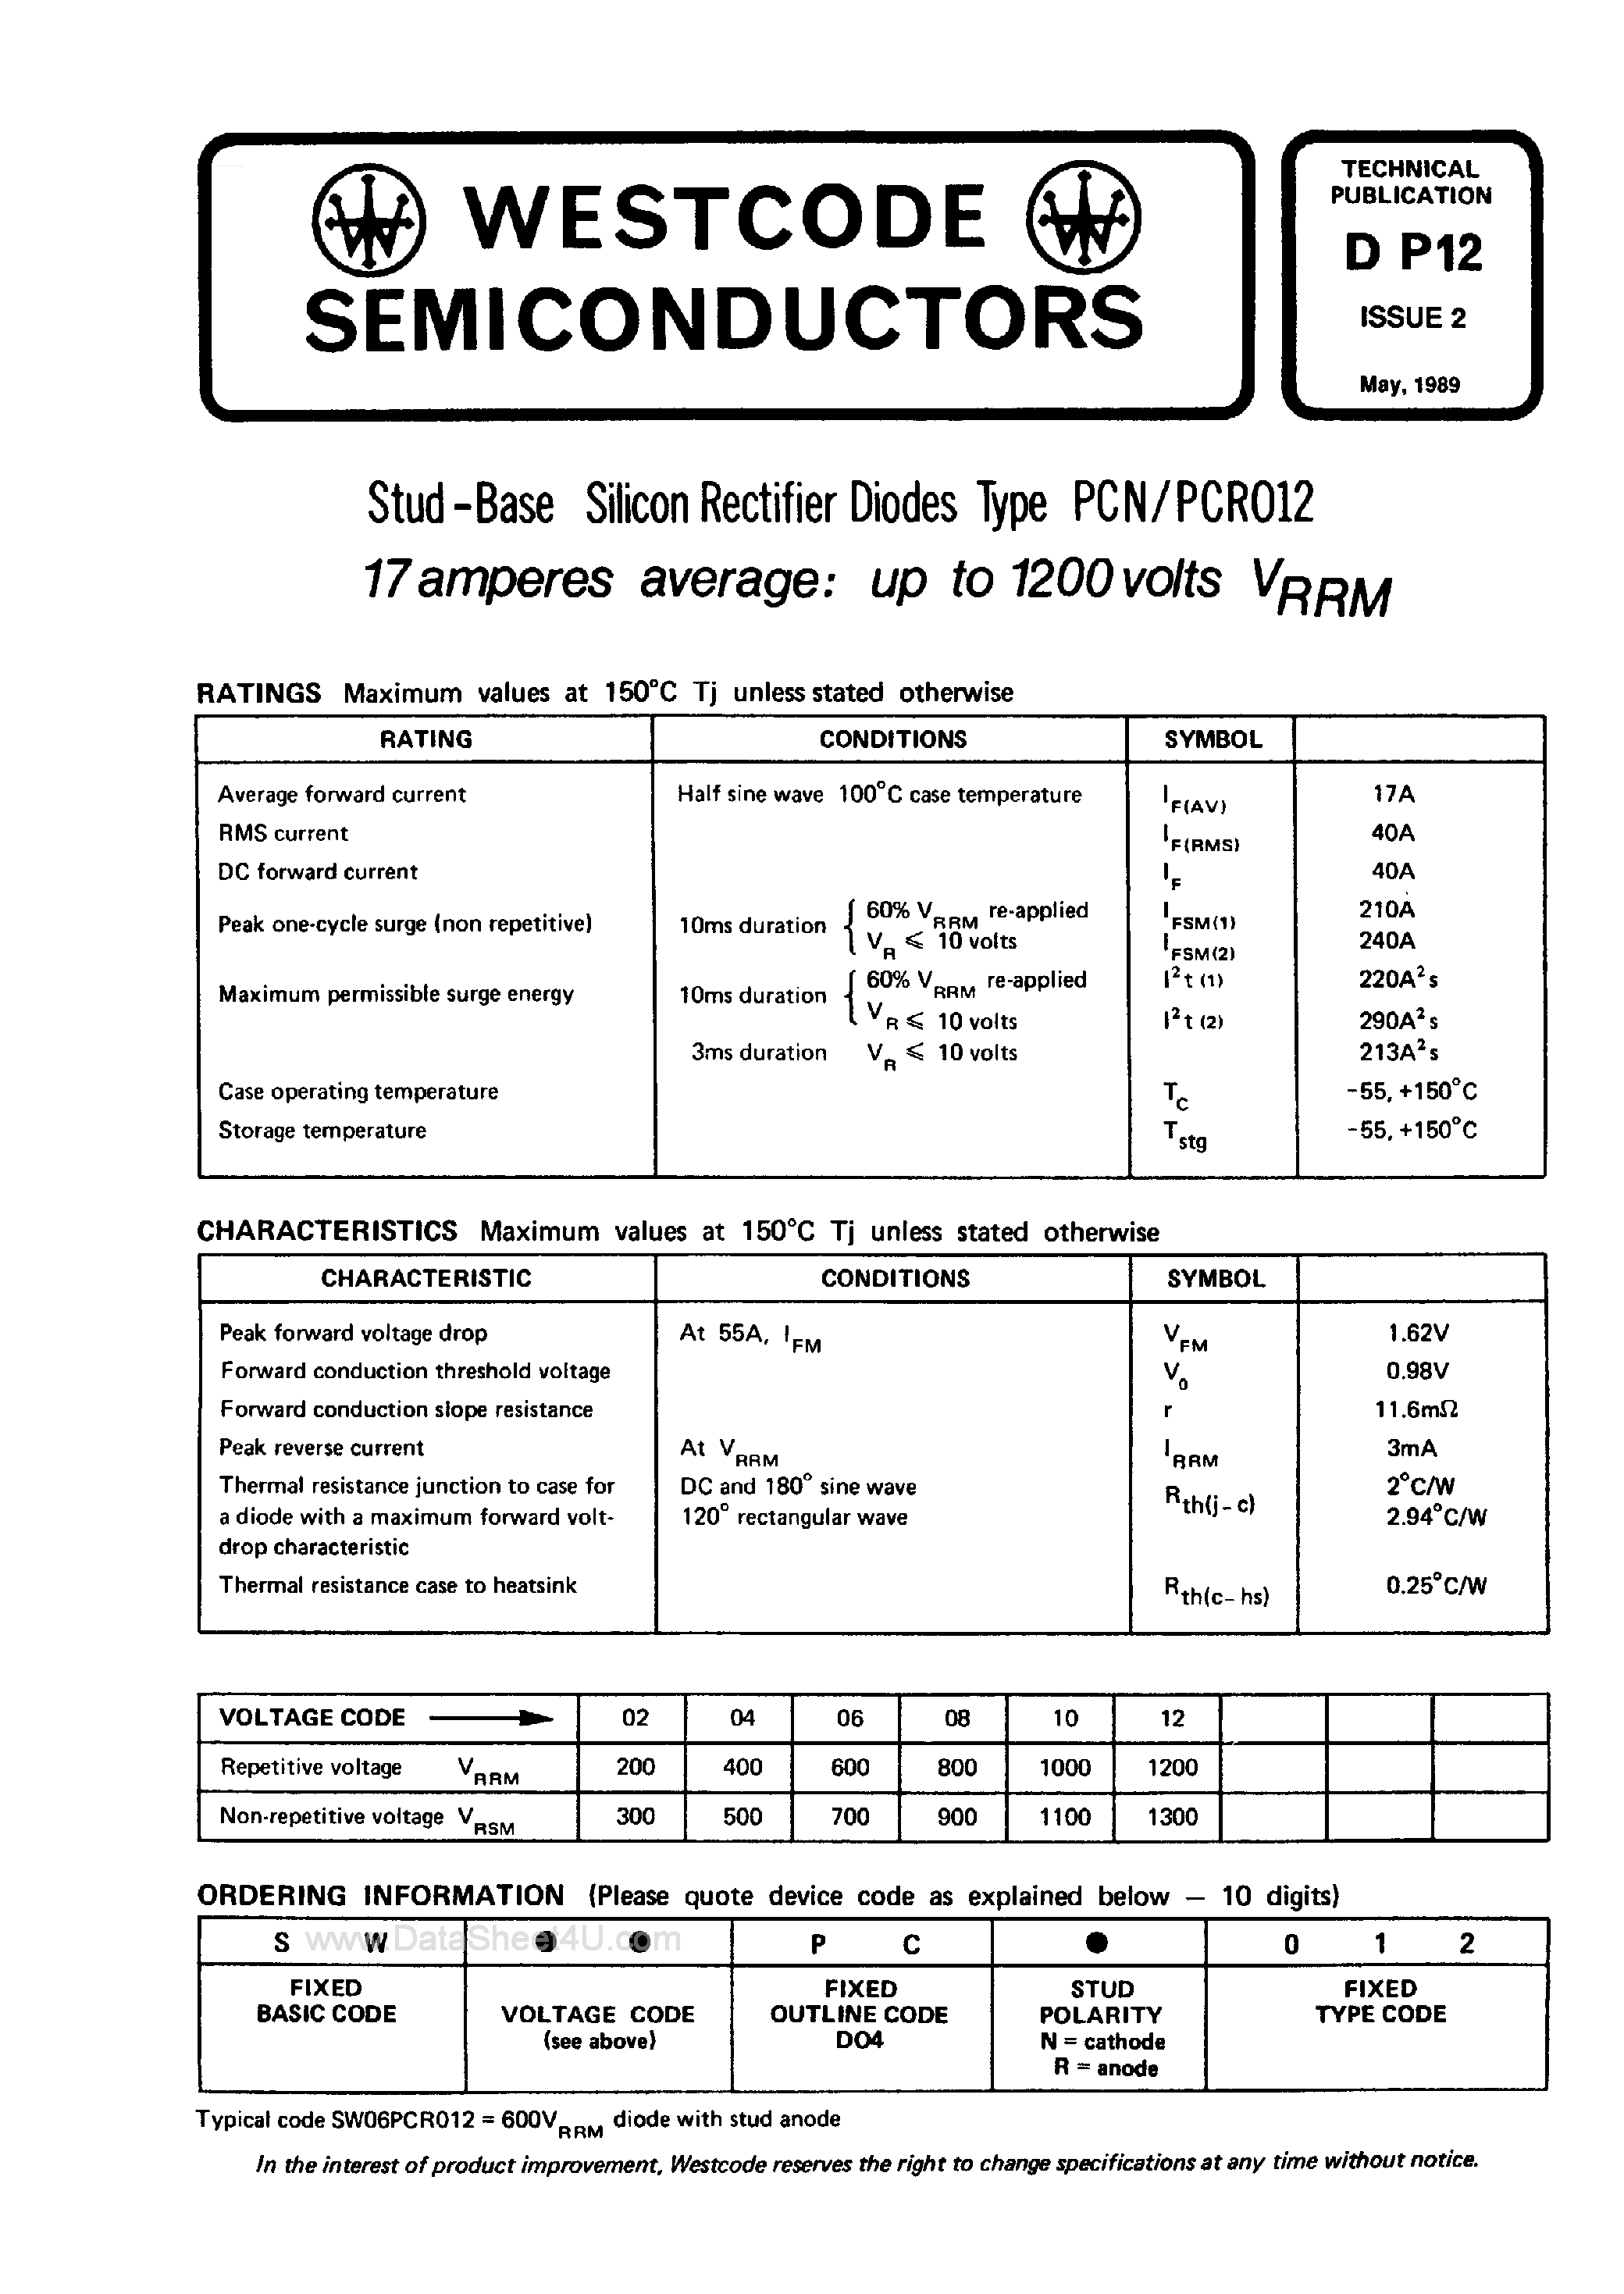 Datasheet SW15PCN012 - Stud Base Silicon Rectifier Diodes page 1